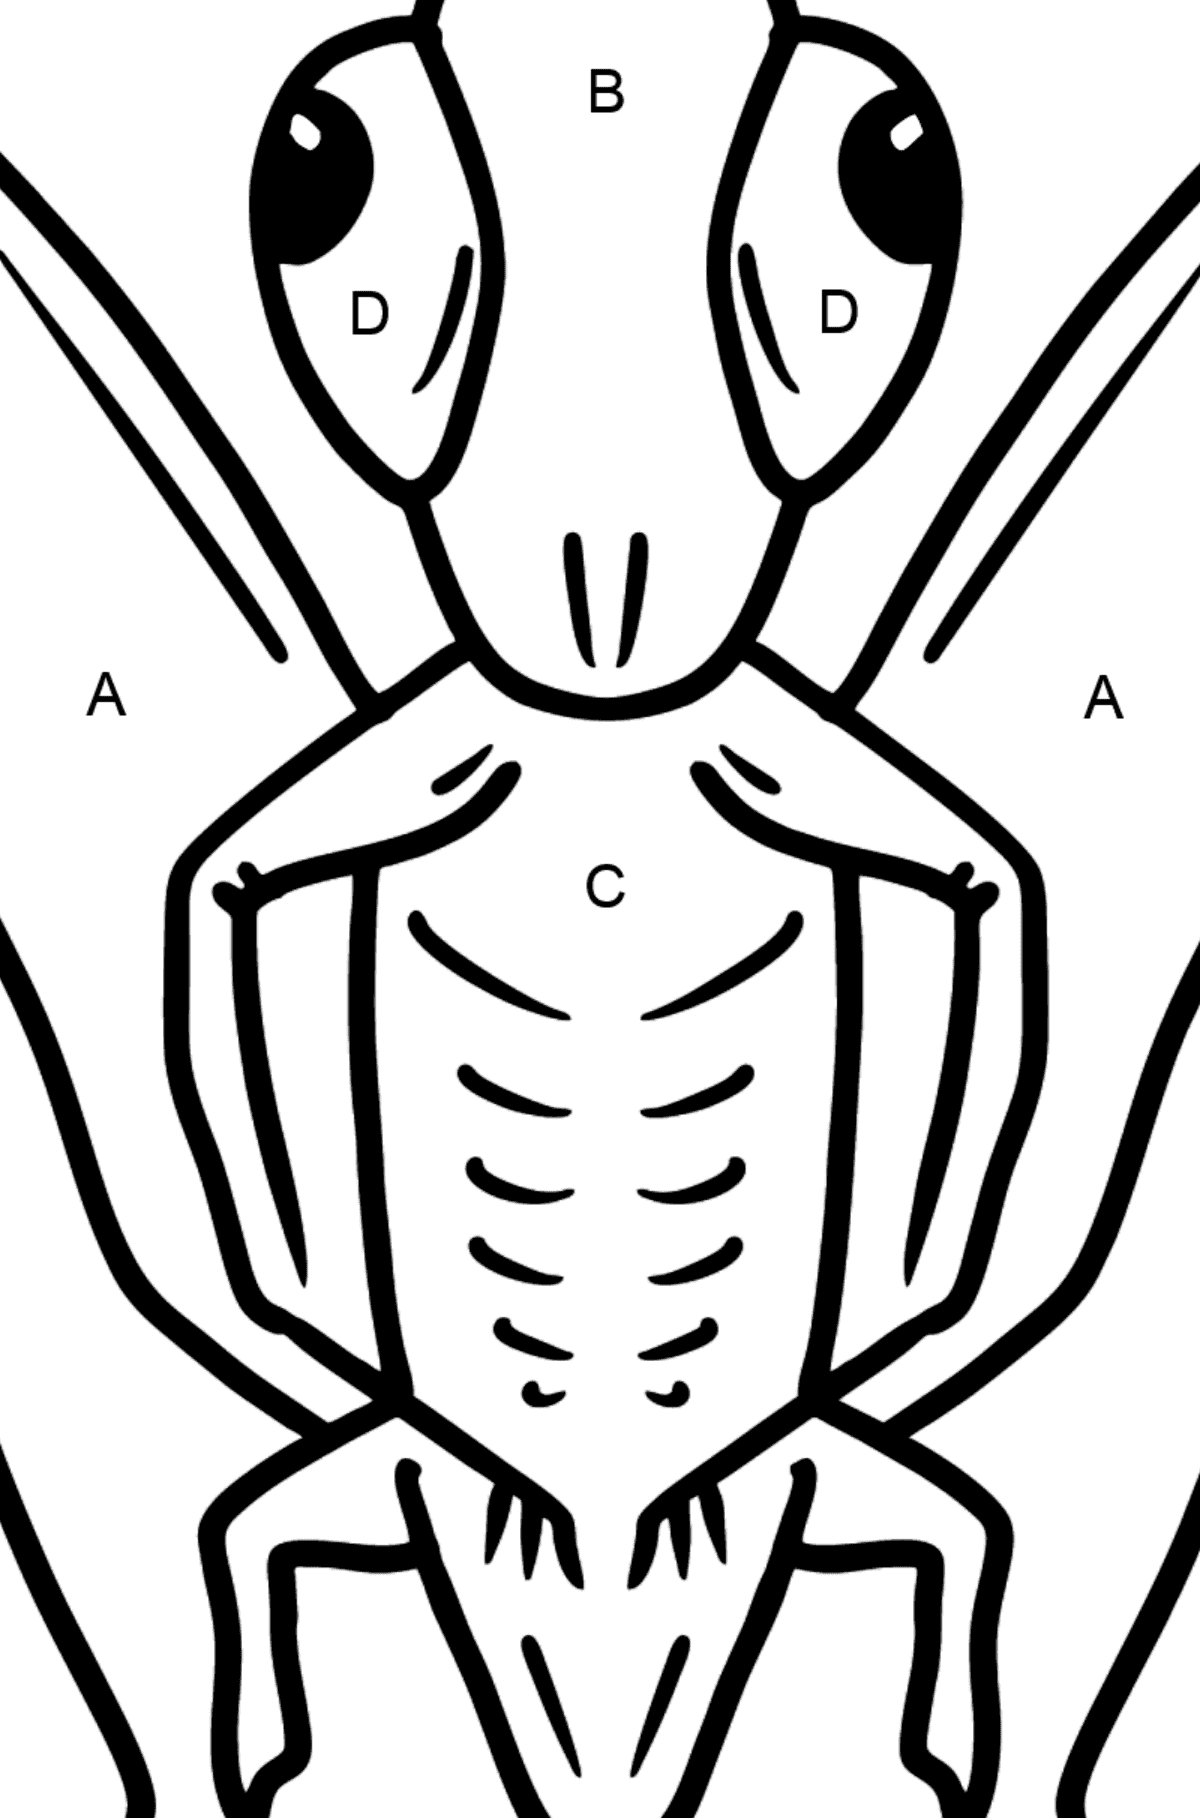 Grasshopper coloring page - Coloring by Letters for Kids